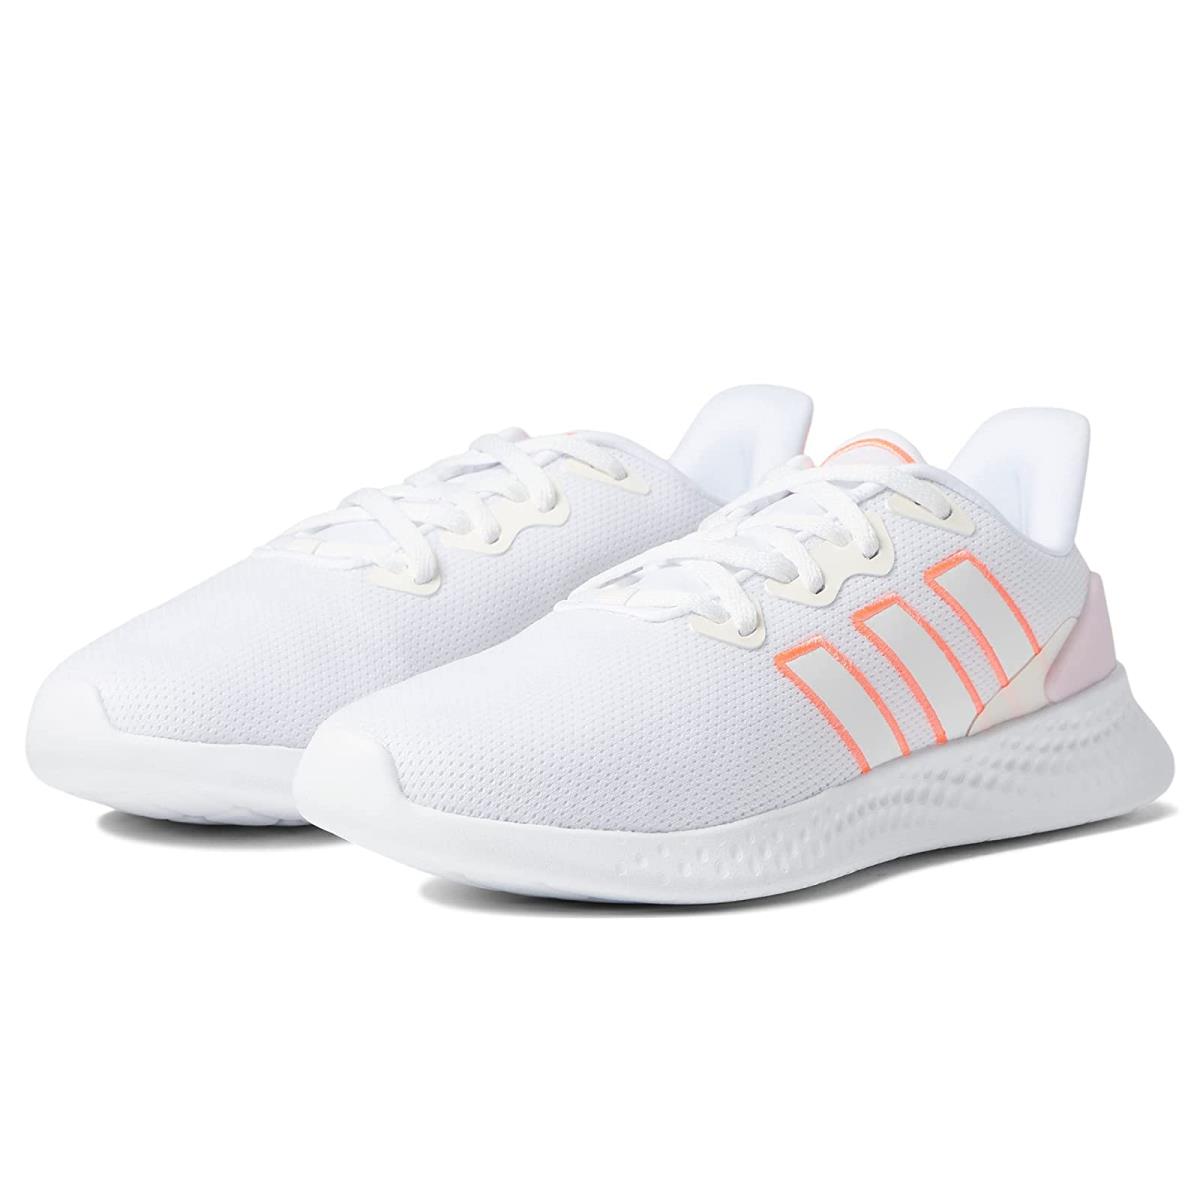 Woman`s Sneakers Athletic Shoes Adidas Running Puremotion SE White/Acid Red/Chalk White